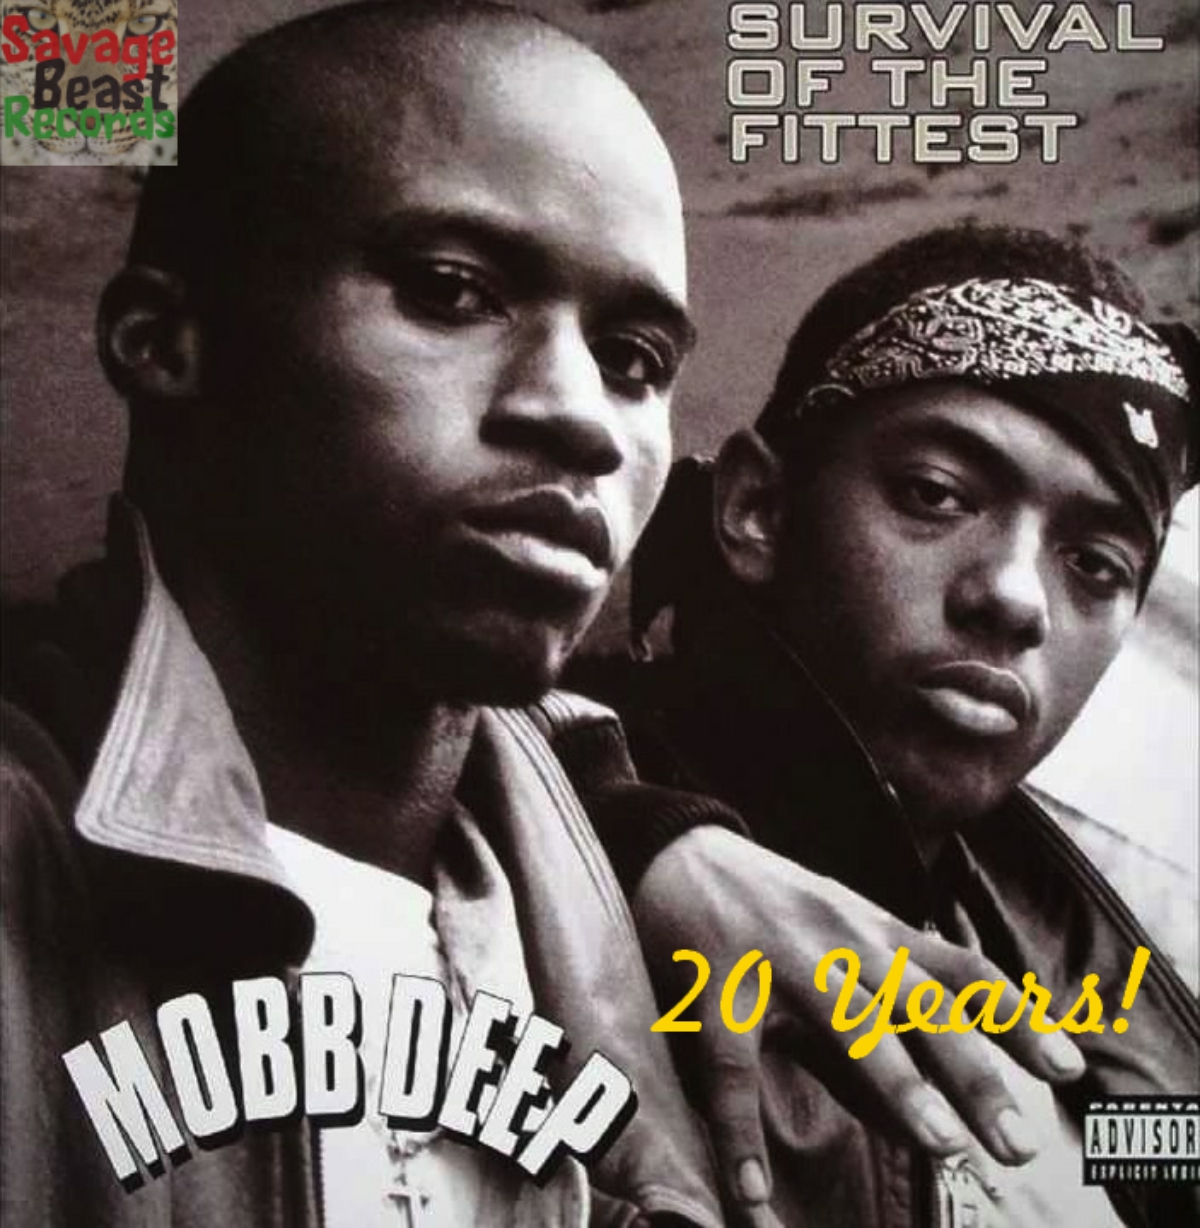 Hip Hop Hip Hop Landmark: Mobb Deep's "Survival Of The Fittest" Released 20 Years Ago Today!Hip Hop Landmark: Mobb Deep's "Survival Of The Fittest" Released 20 Years Ago Today!Landmark: Mobb Deep's "Survival Of The Fittest" Released 20 Years Ago Today!